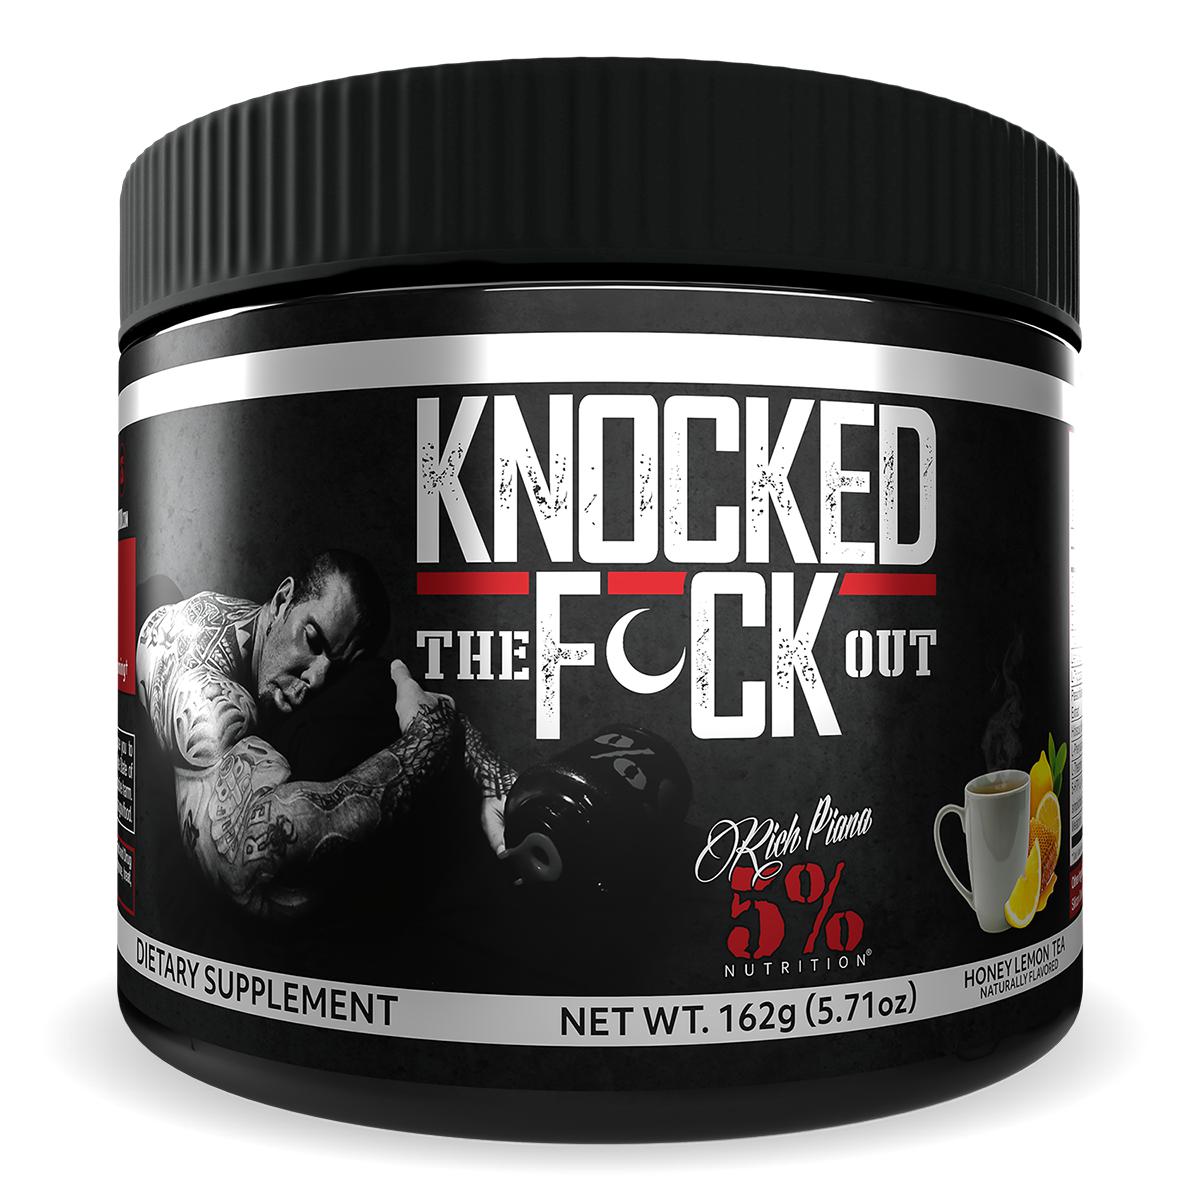 Rich Piana 5% Nutrition Knocked The F*ck Out Sleep picture